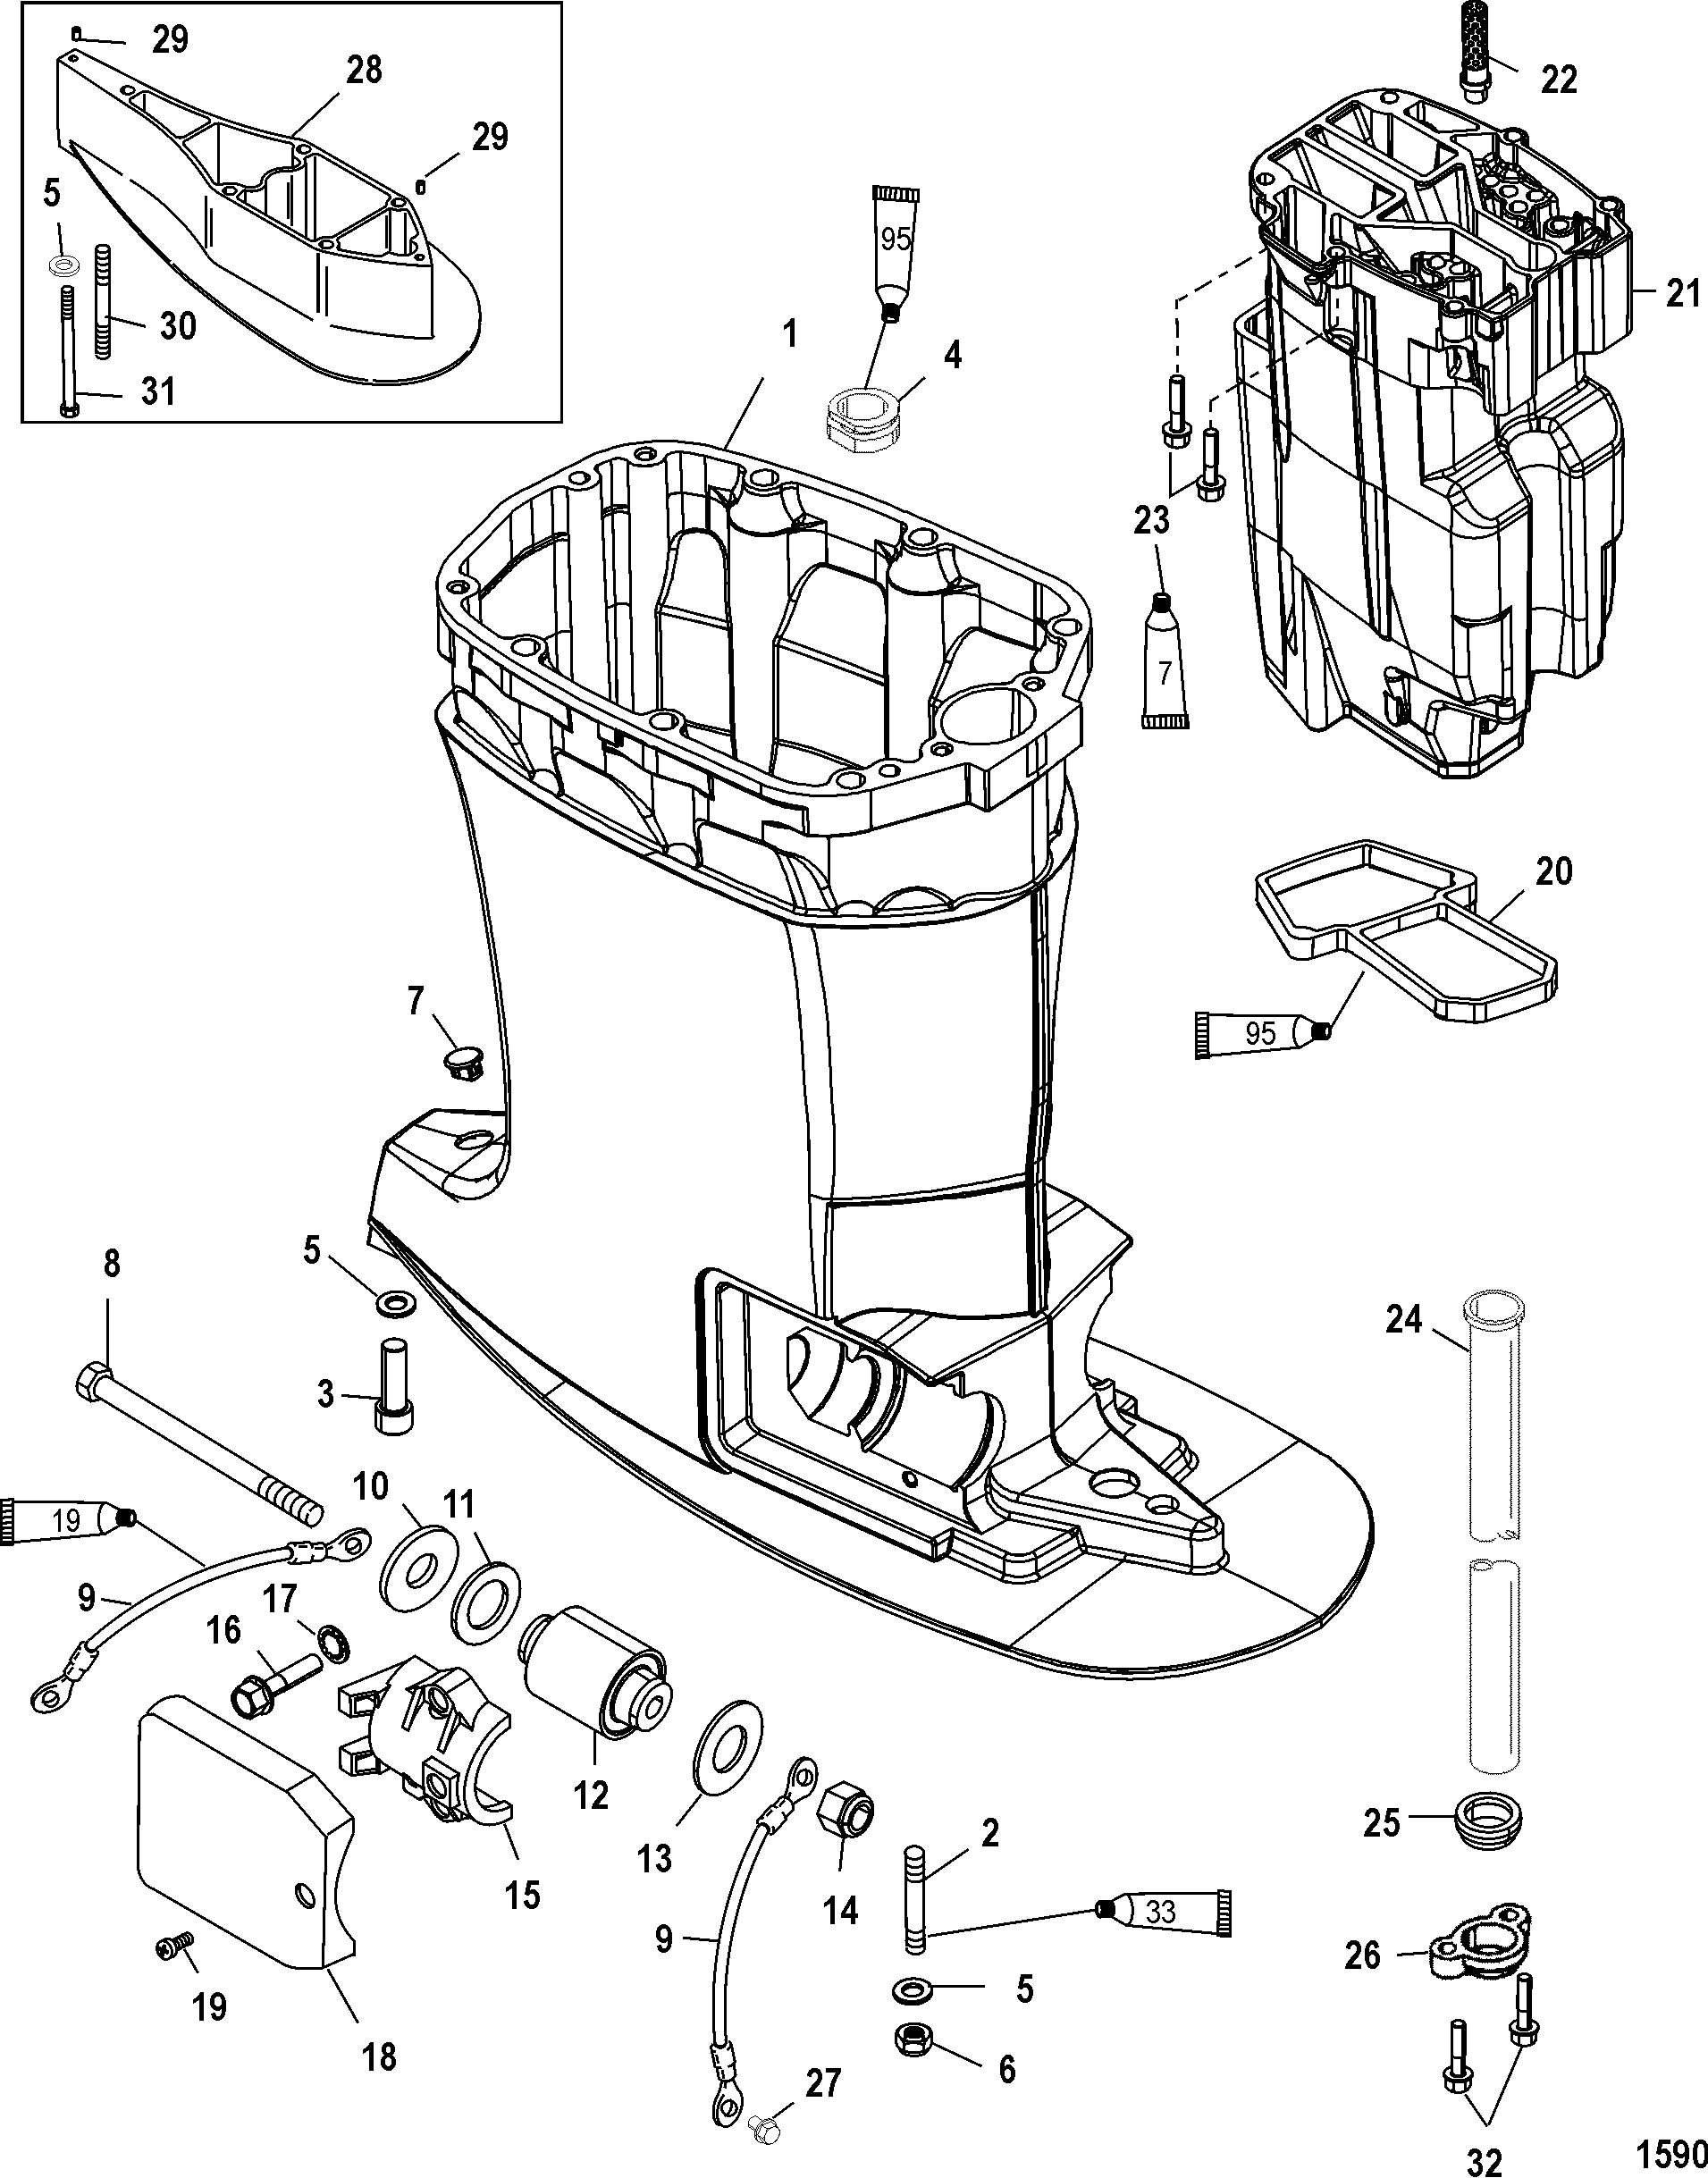 Drivshaft Housing and Exhaust Tube